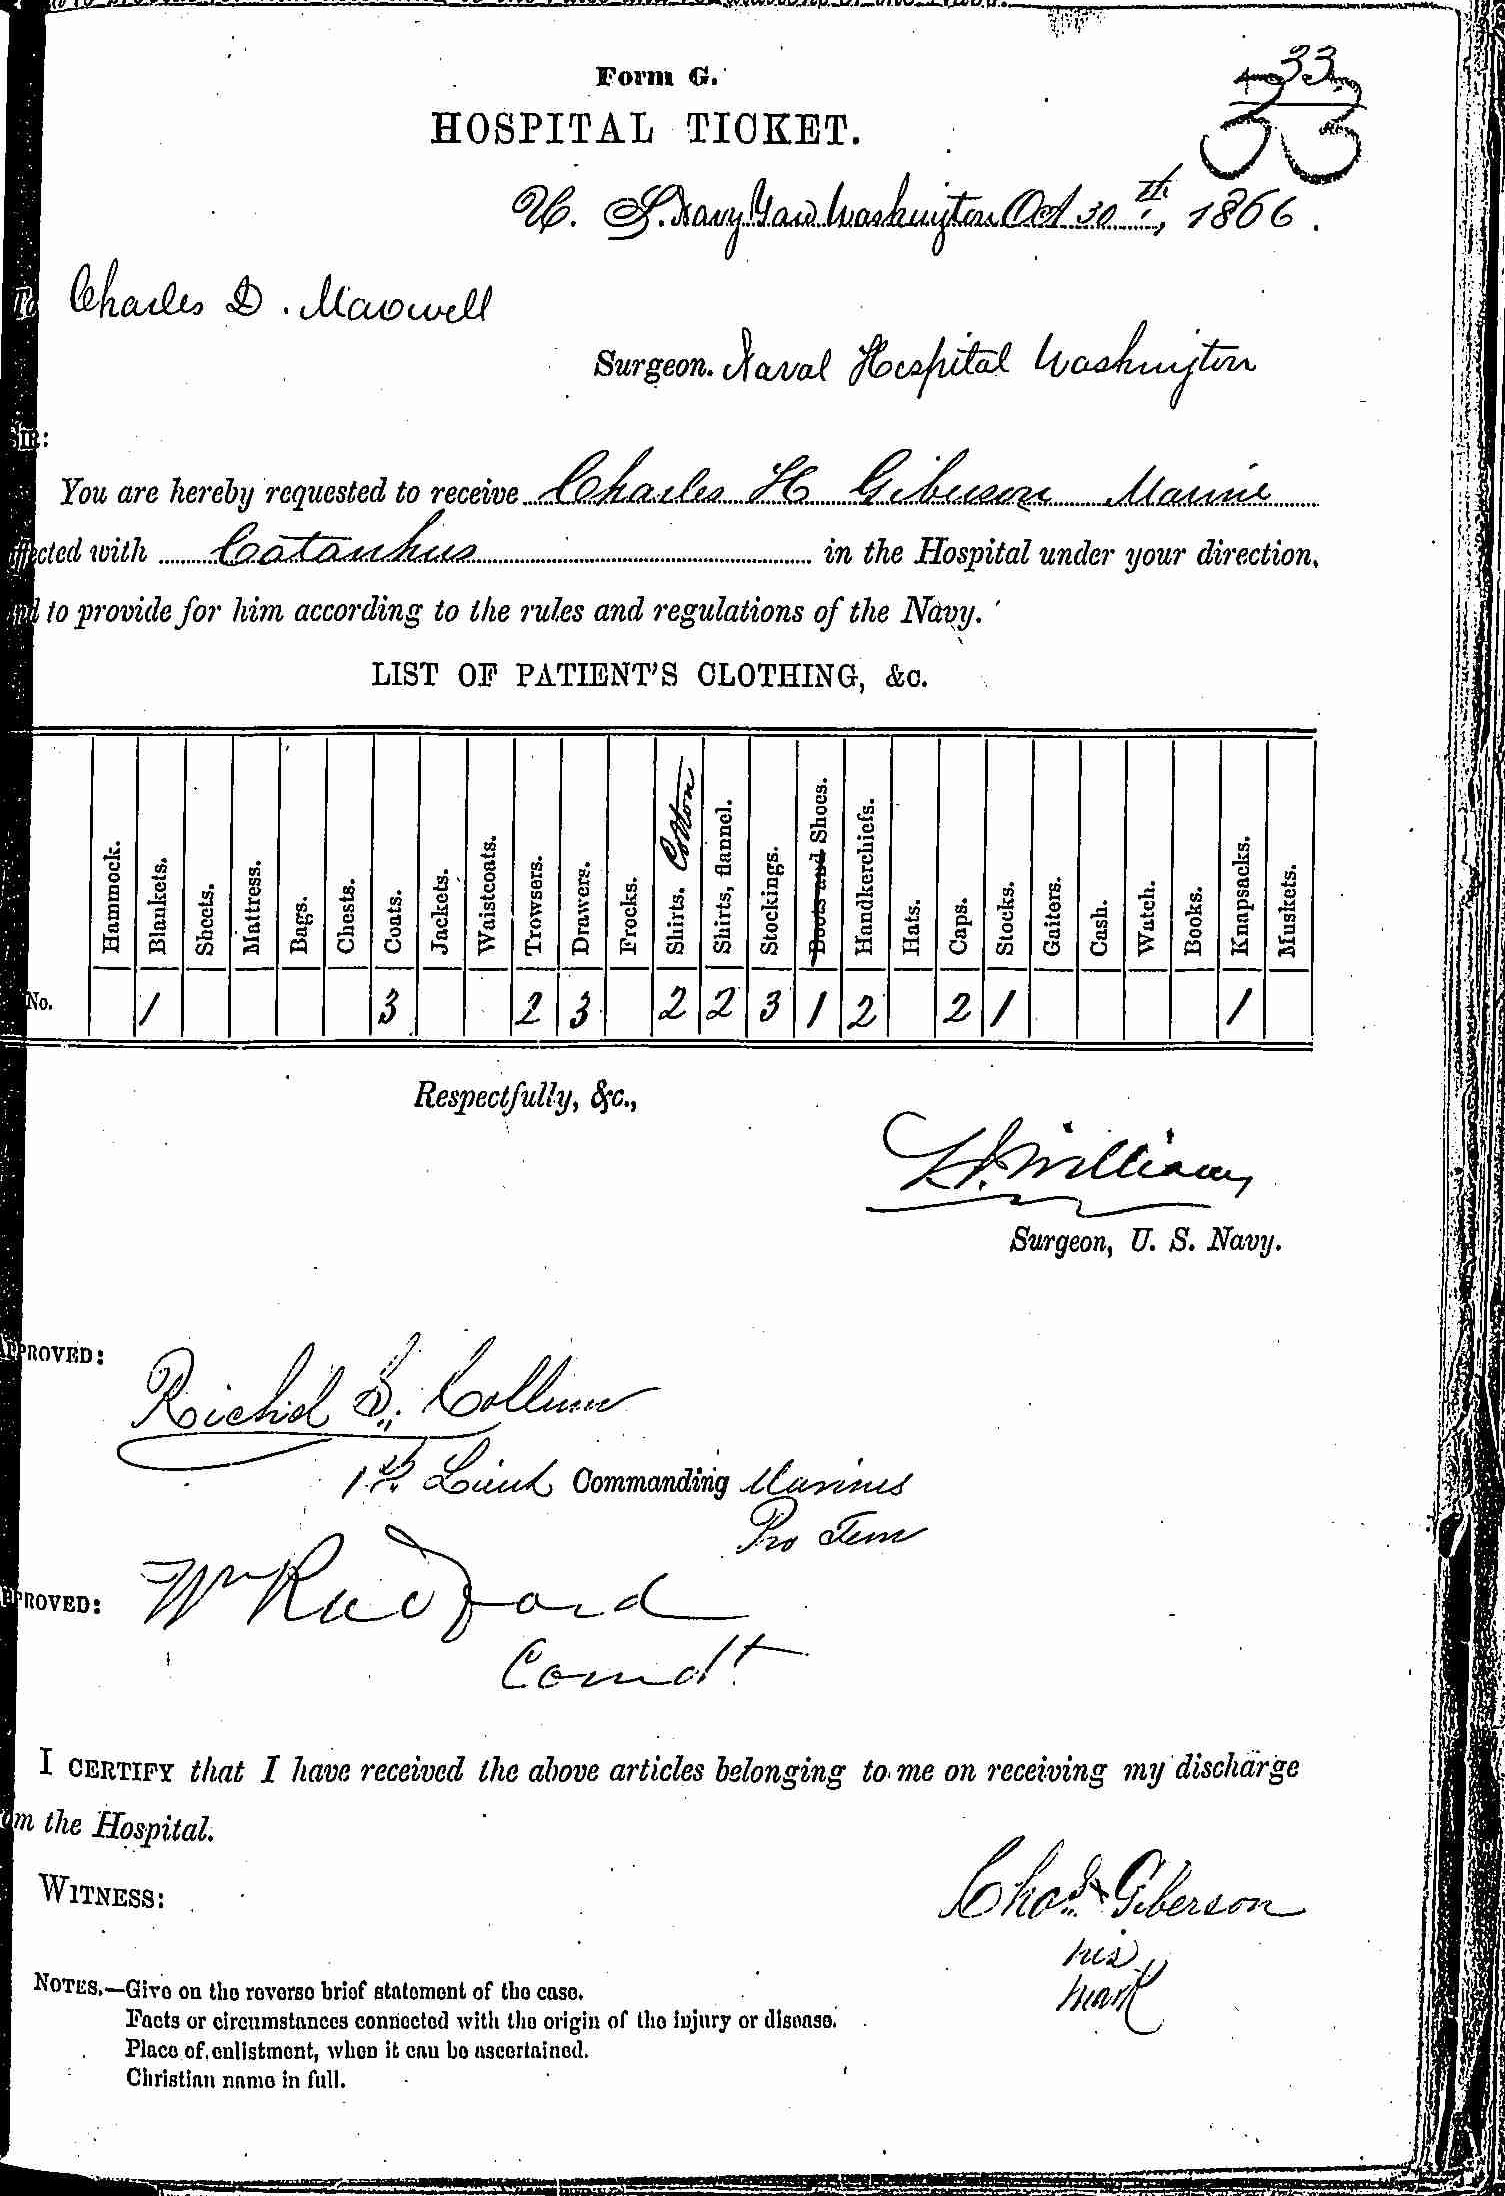 Entry for Charles H. Giberson (first admission page 1 of 2) in the log Hospital Tickets and Case Papers - Naval Hospital - Washington, D.C. - 1865-68